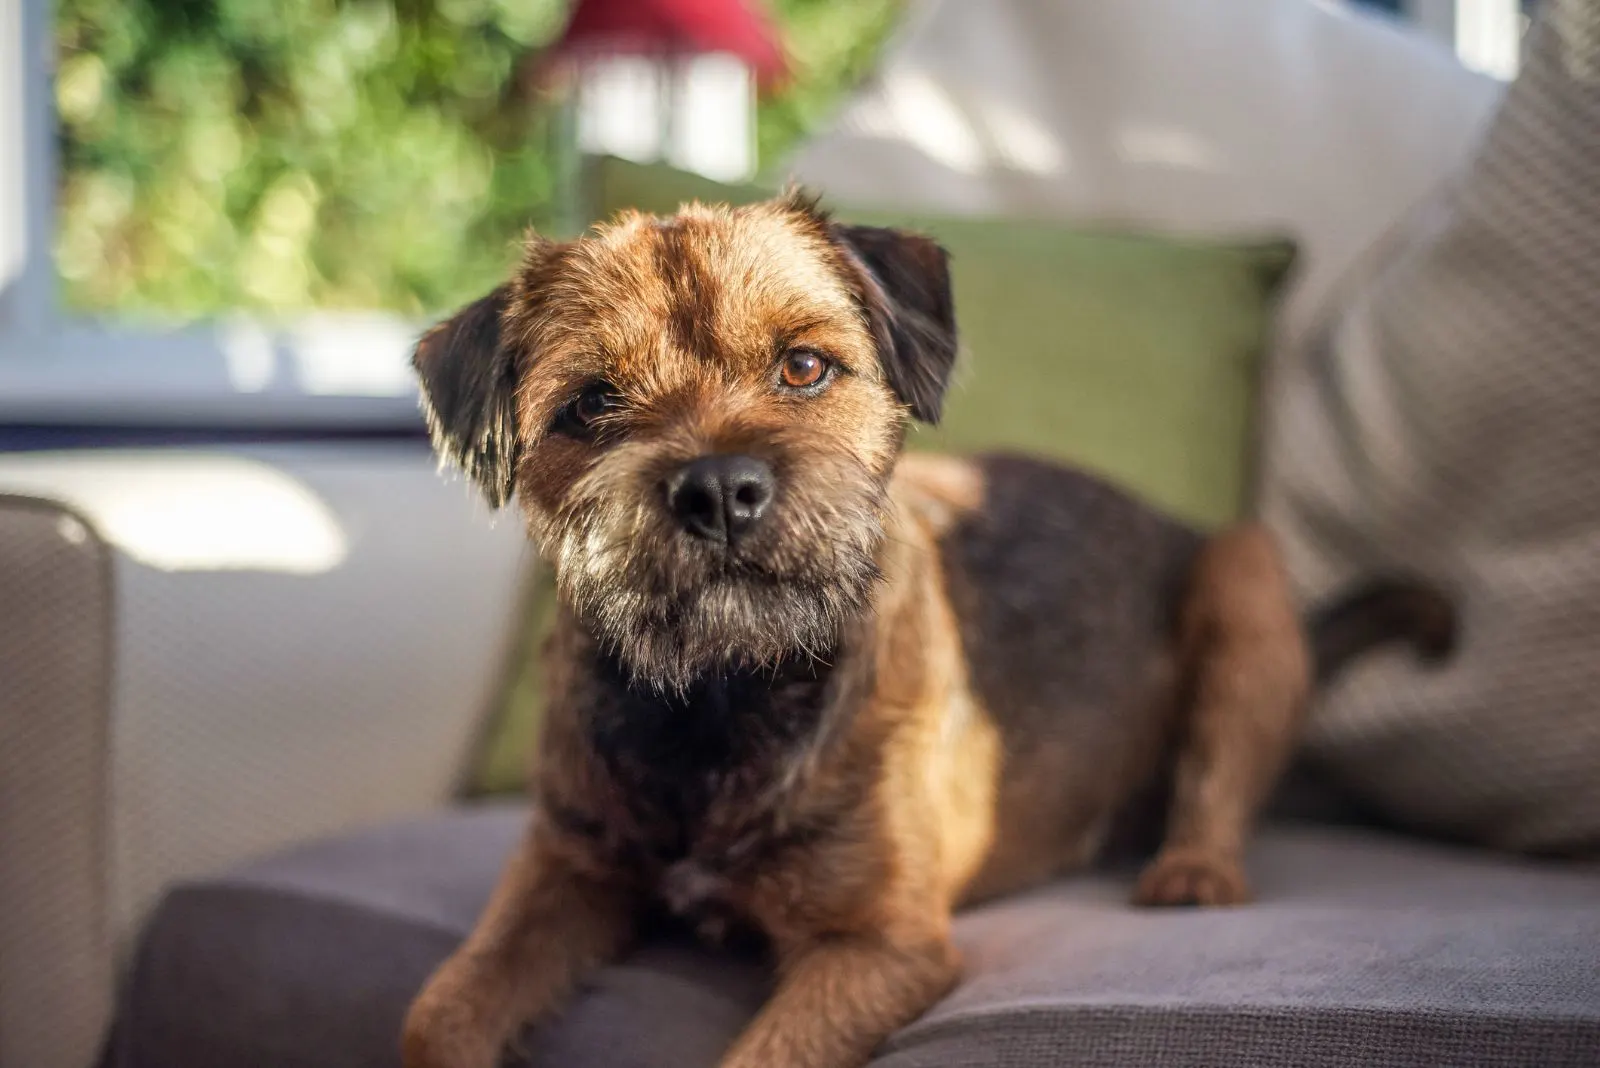 Border Terrier puppy lying on the couch